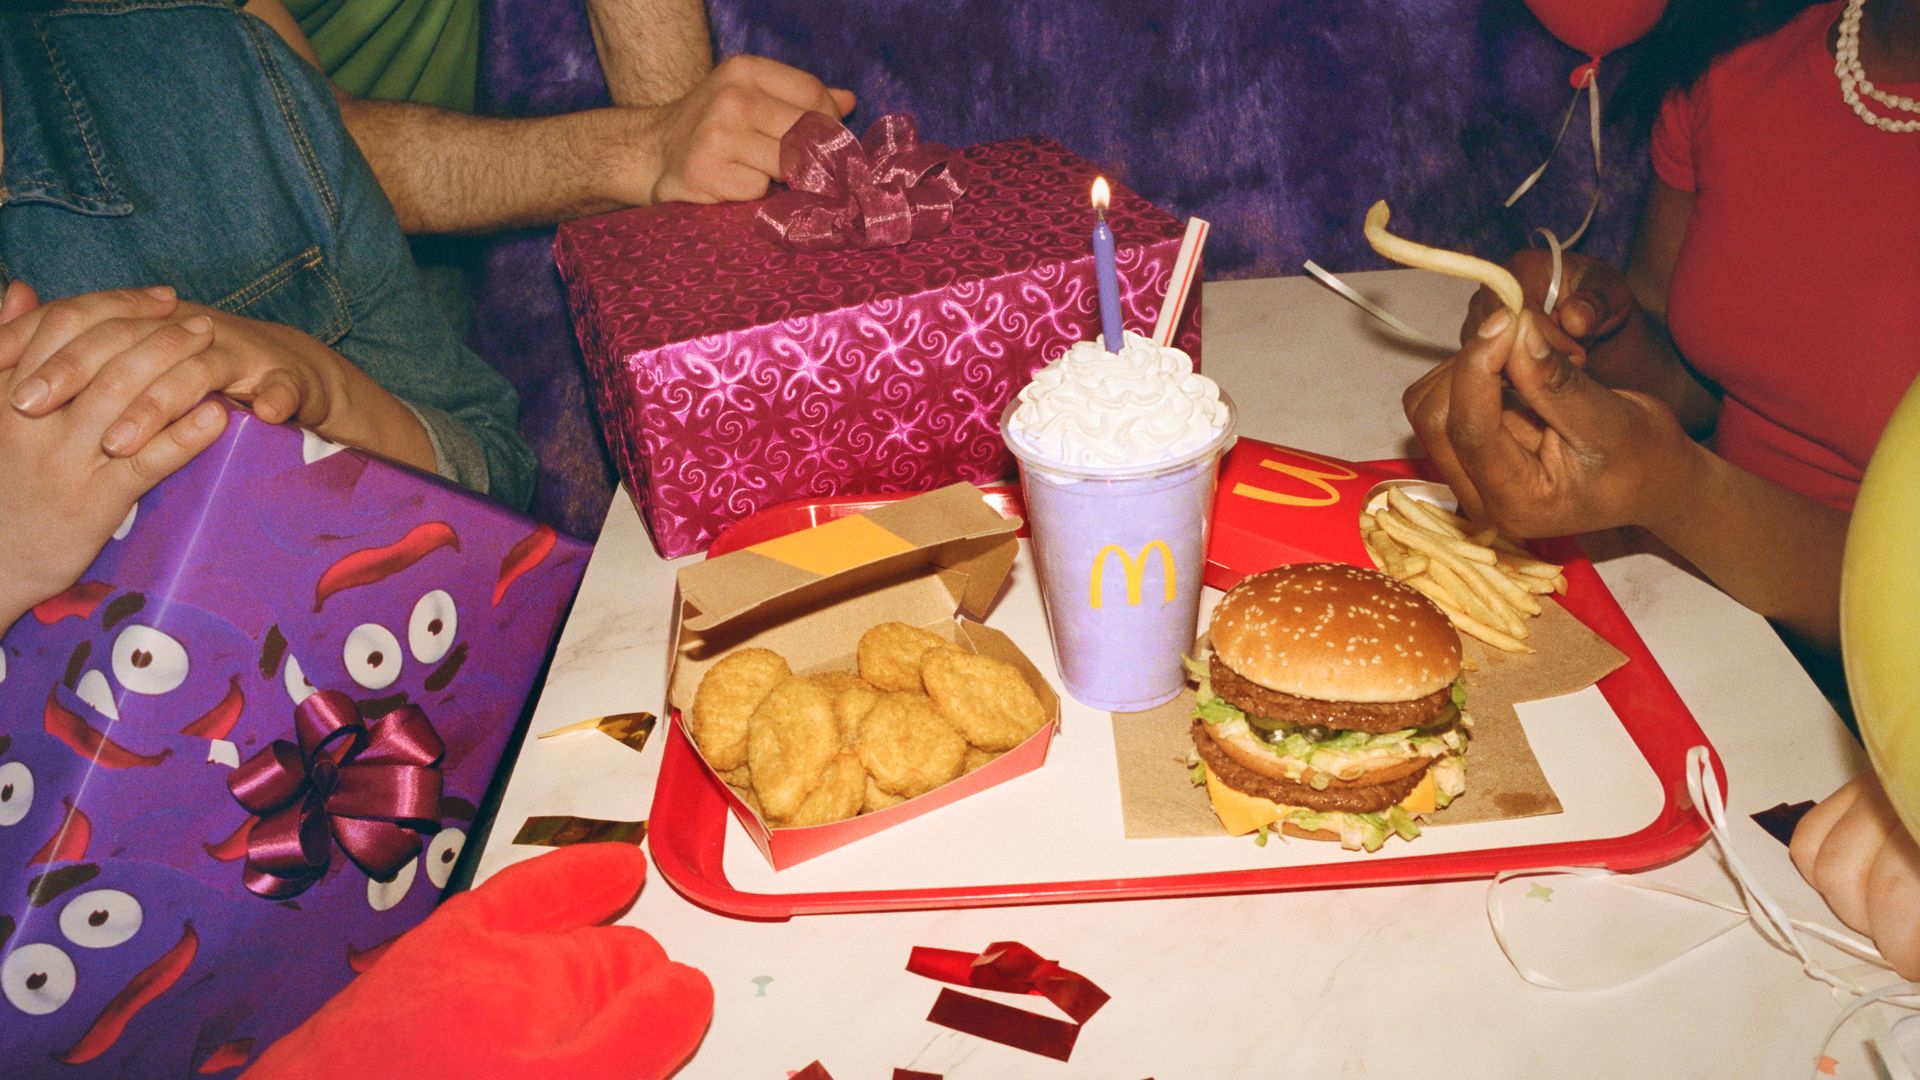 Gifts around a table with McDonald's Chicken McNuggets, a purple shake, Big Mac and fries